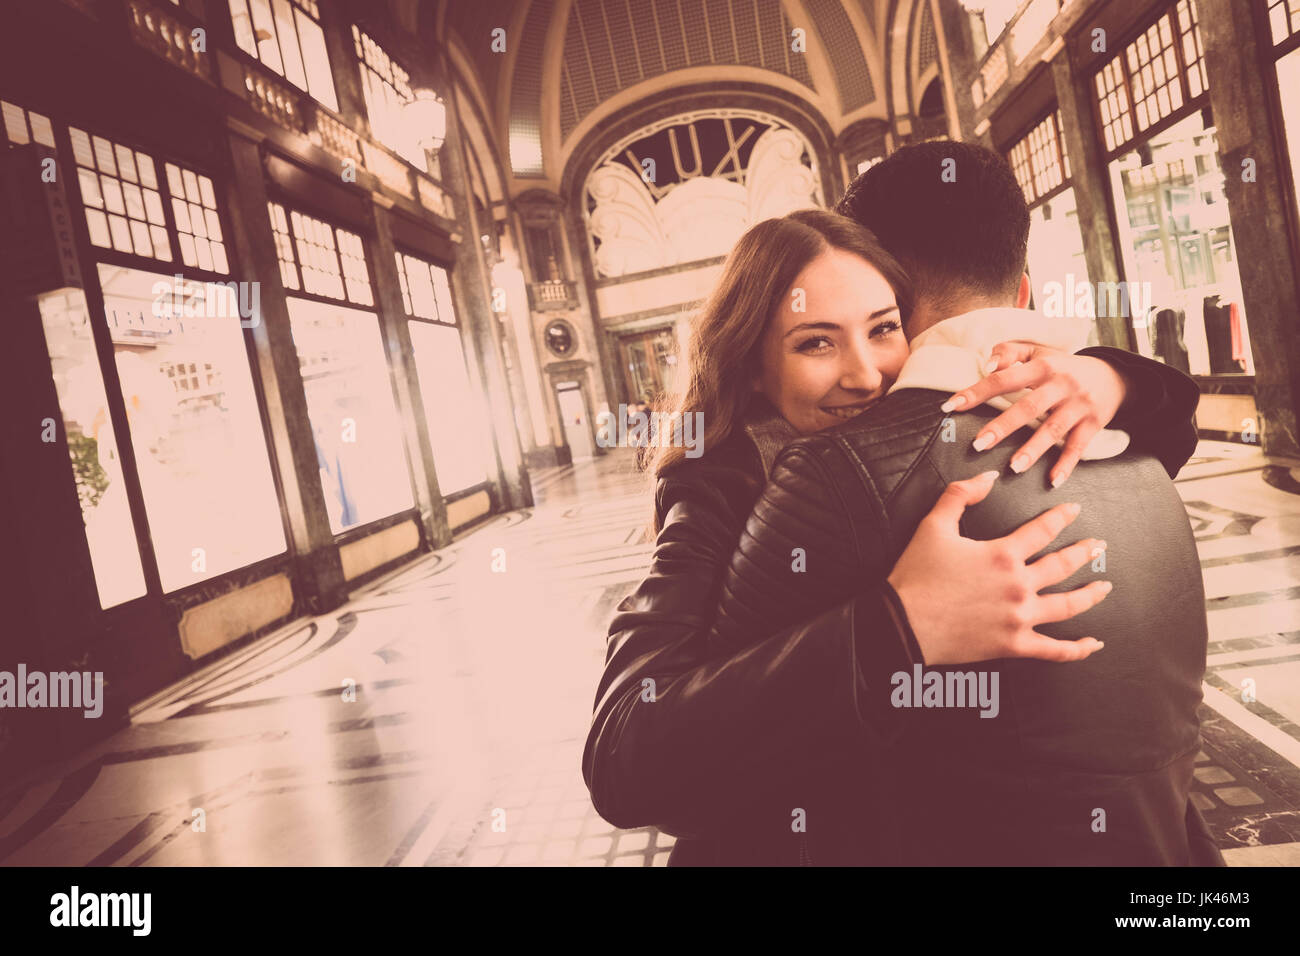 Smiling Caucasian couple hugging in lobby Stock Photo